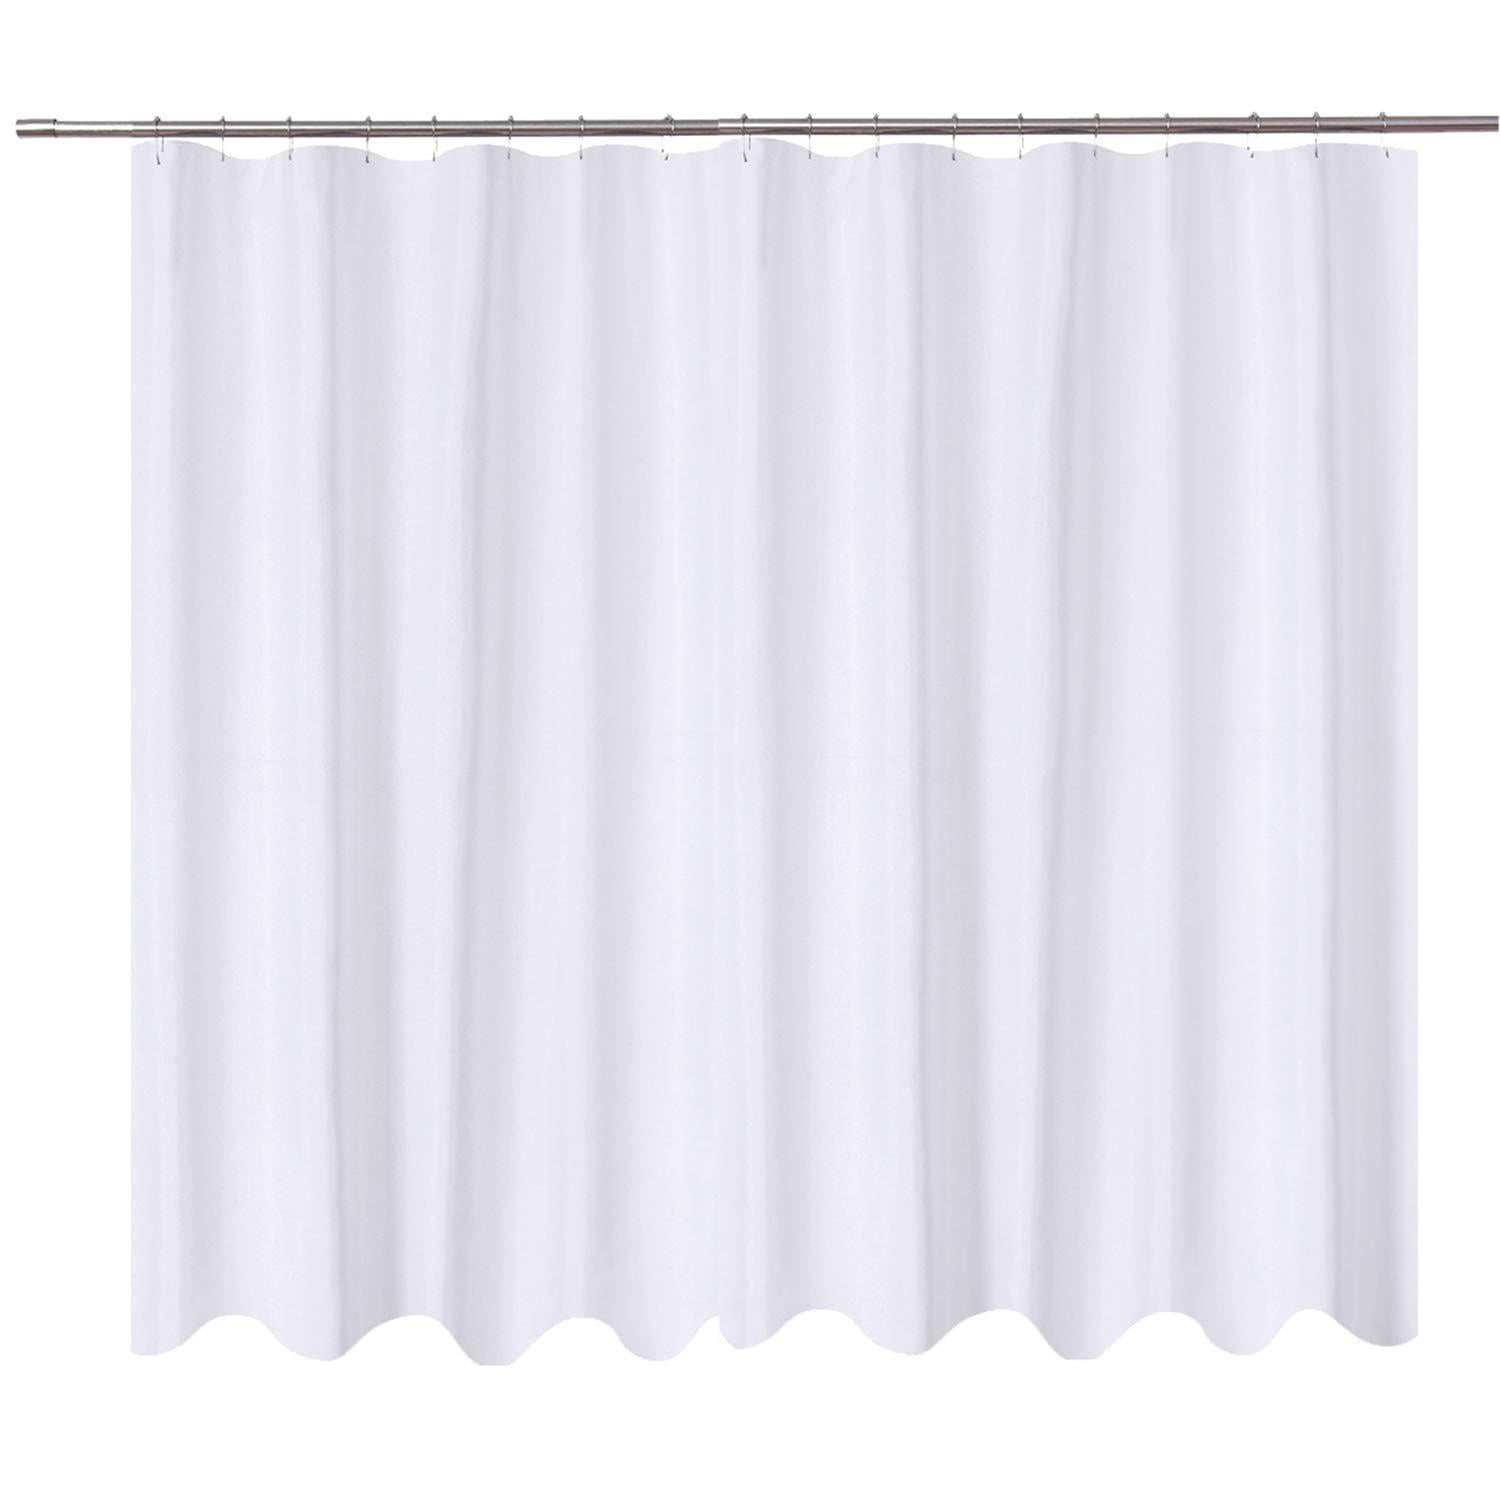 Carnation Home Extra Wide Polyester Fabric Shower Curtain Liner in Ivory 